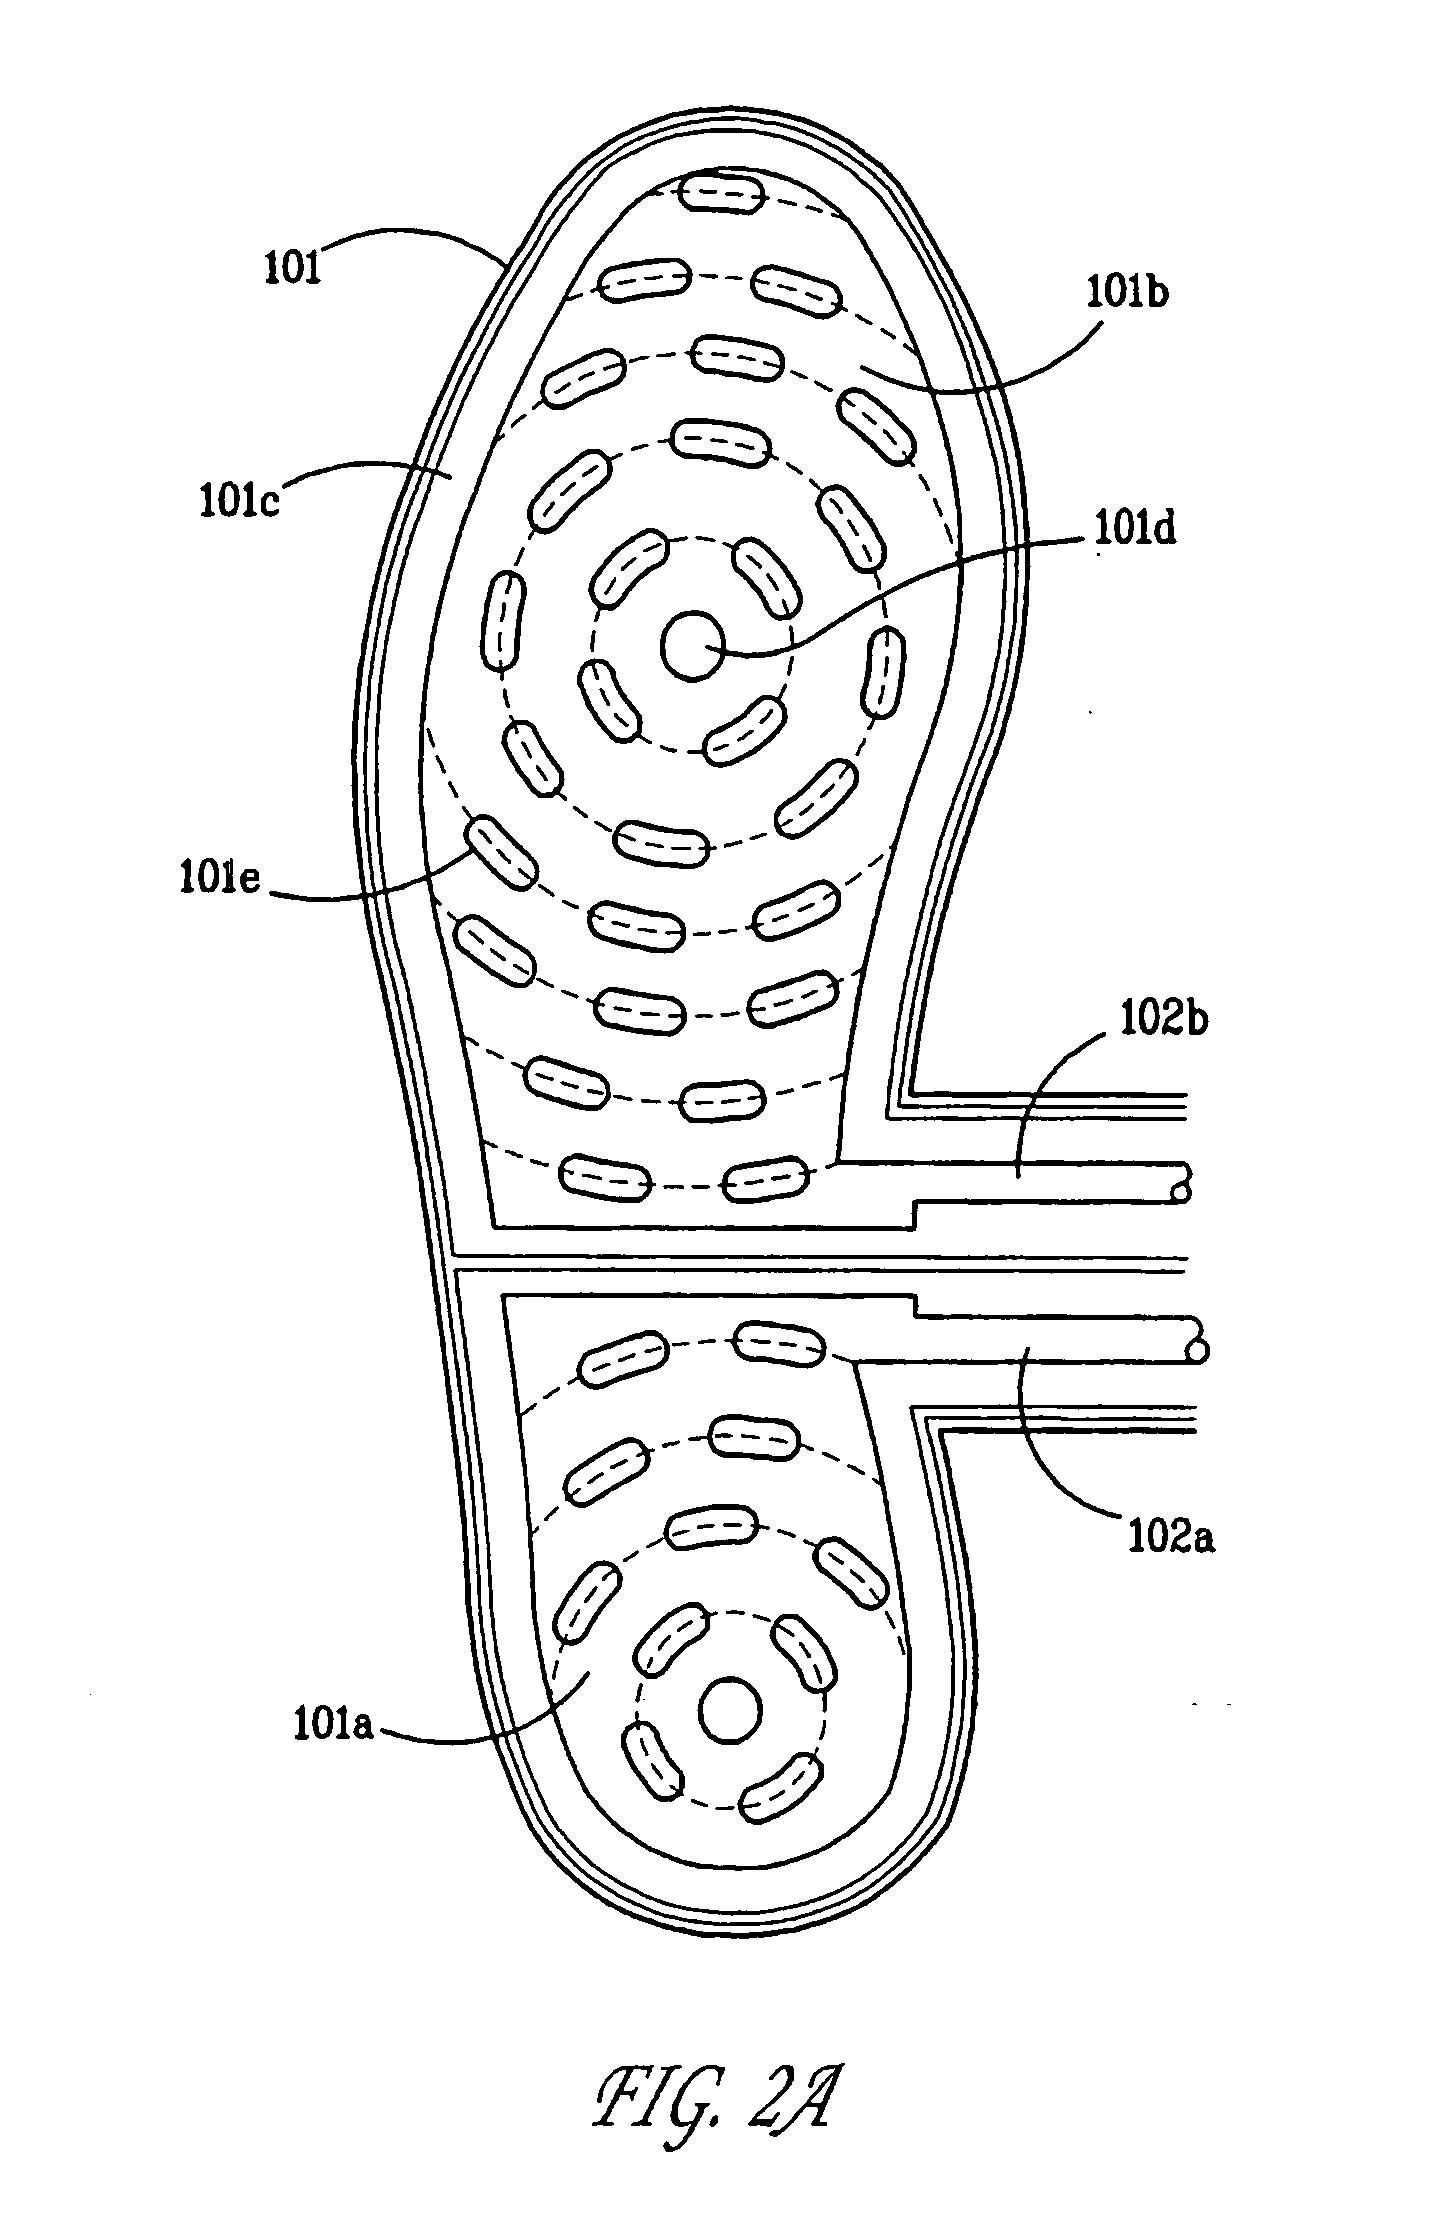 Force sensor system for use in monitoring weight bearing